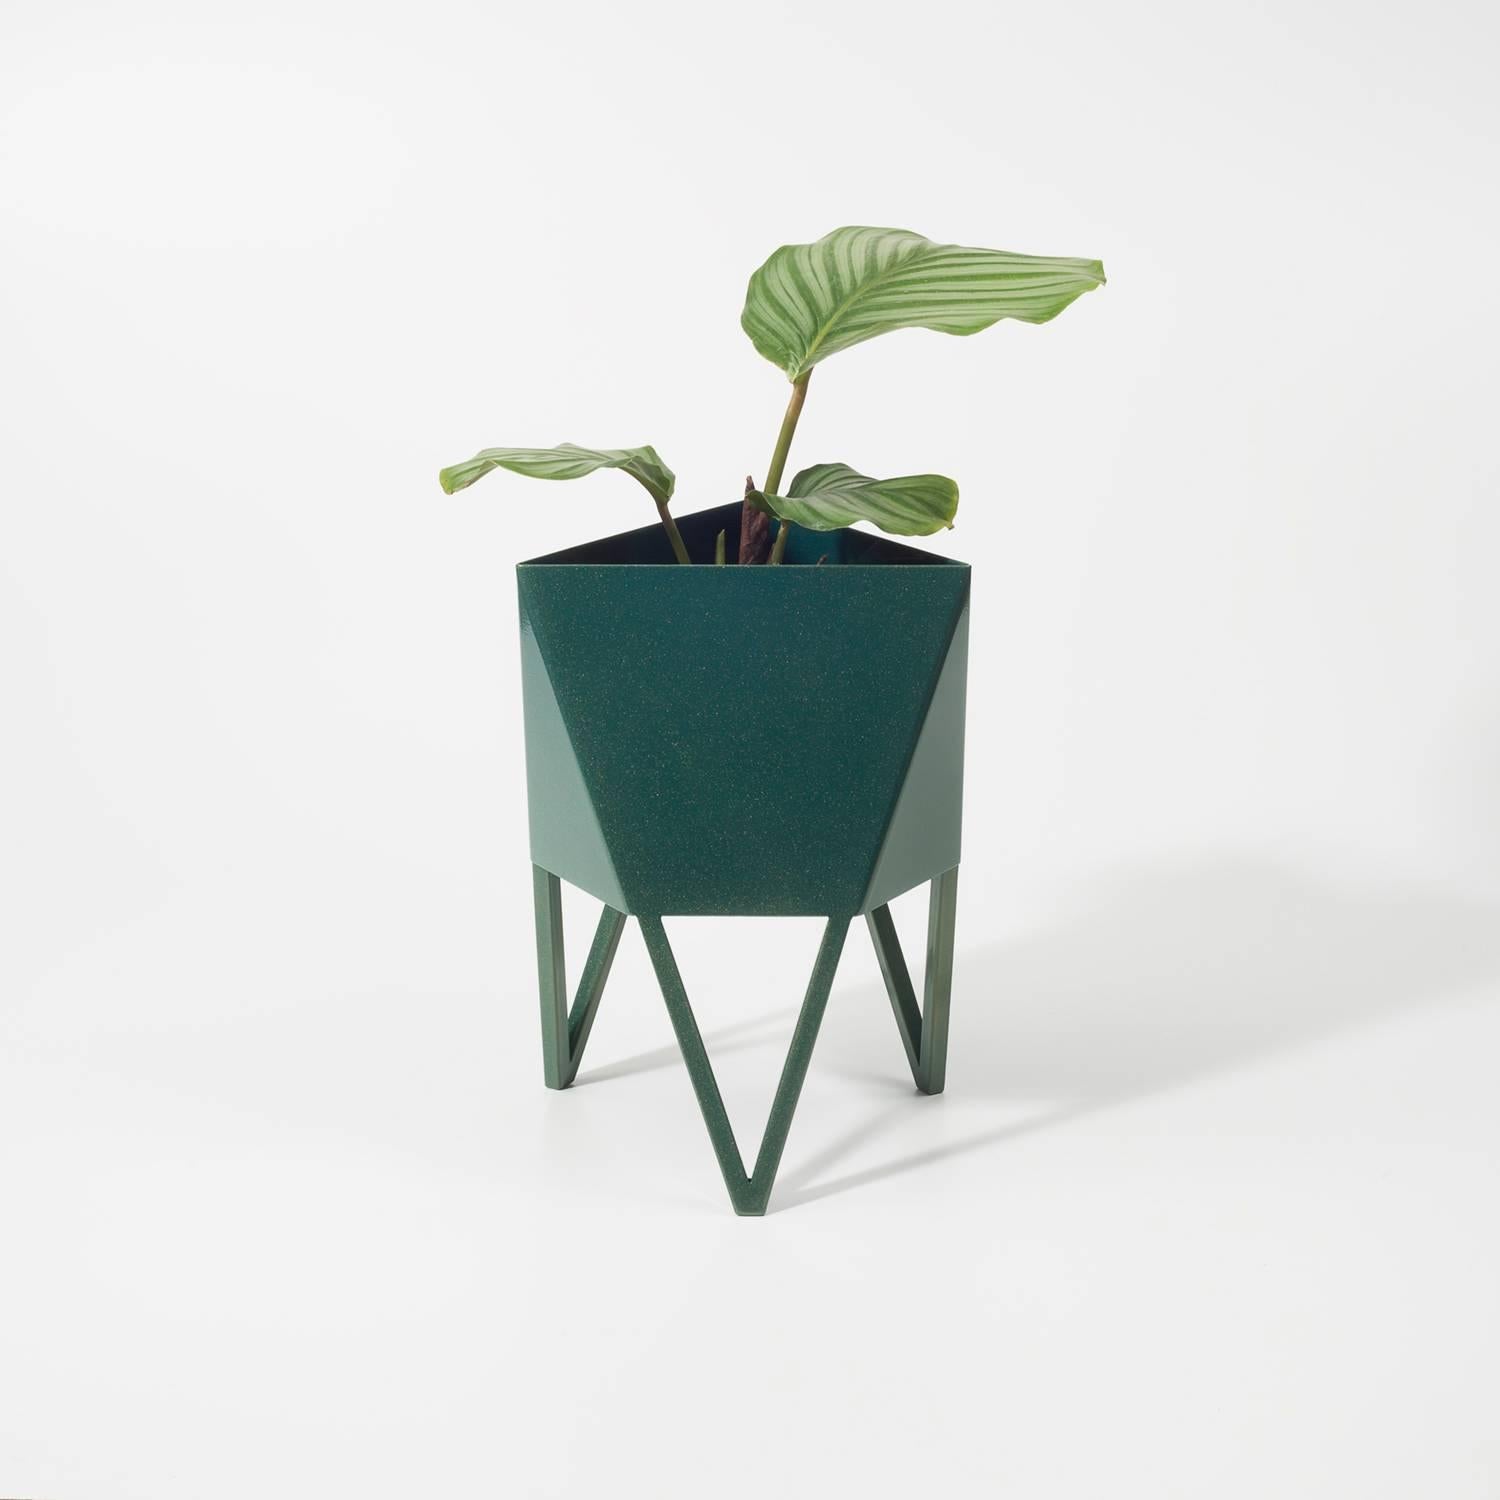 Deca Planter in Pastel Green Steel, Large, by Force/Collide 2